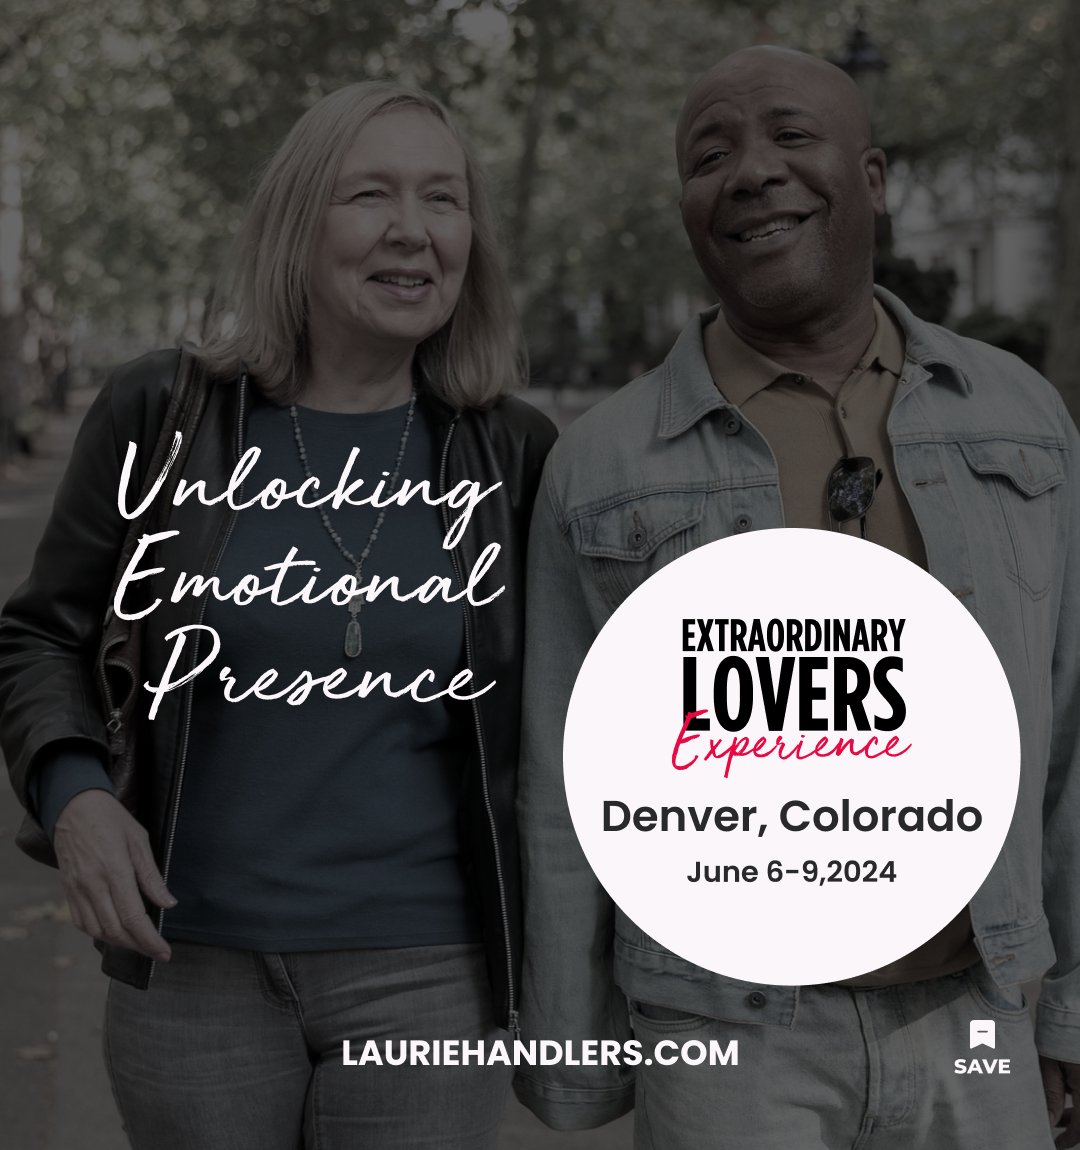 Tired of the same old arguments? 🌪️ ➡️🌅There's a new path awaiting you.  For couples; any gender pairing welcome. #NewBeginnings #DenverExperience #ReignitePassion #DenverLove #ding #LaurieHandlers #Denver #ExtraordinaryLovers lauriehandlers.com/link?utm_sourc…